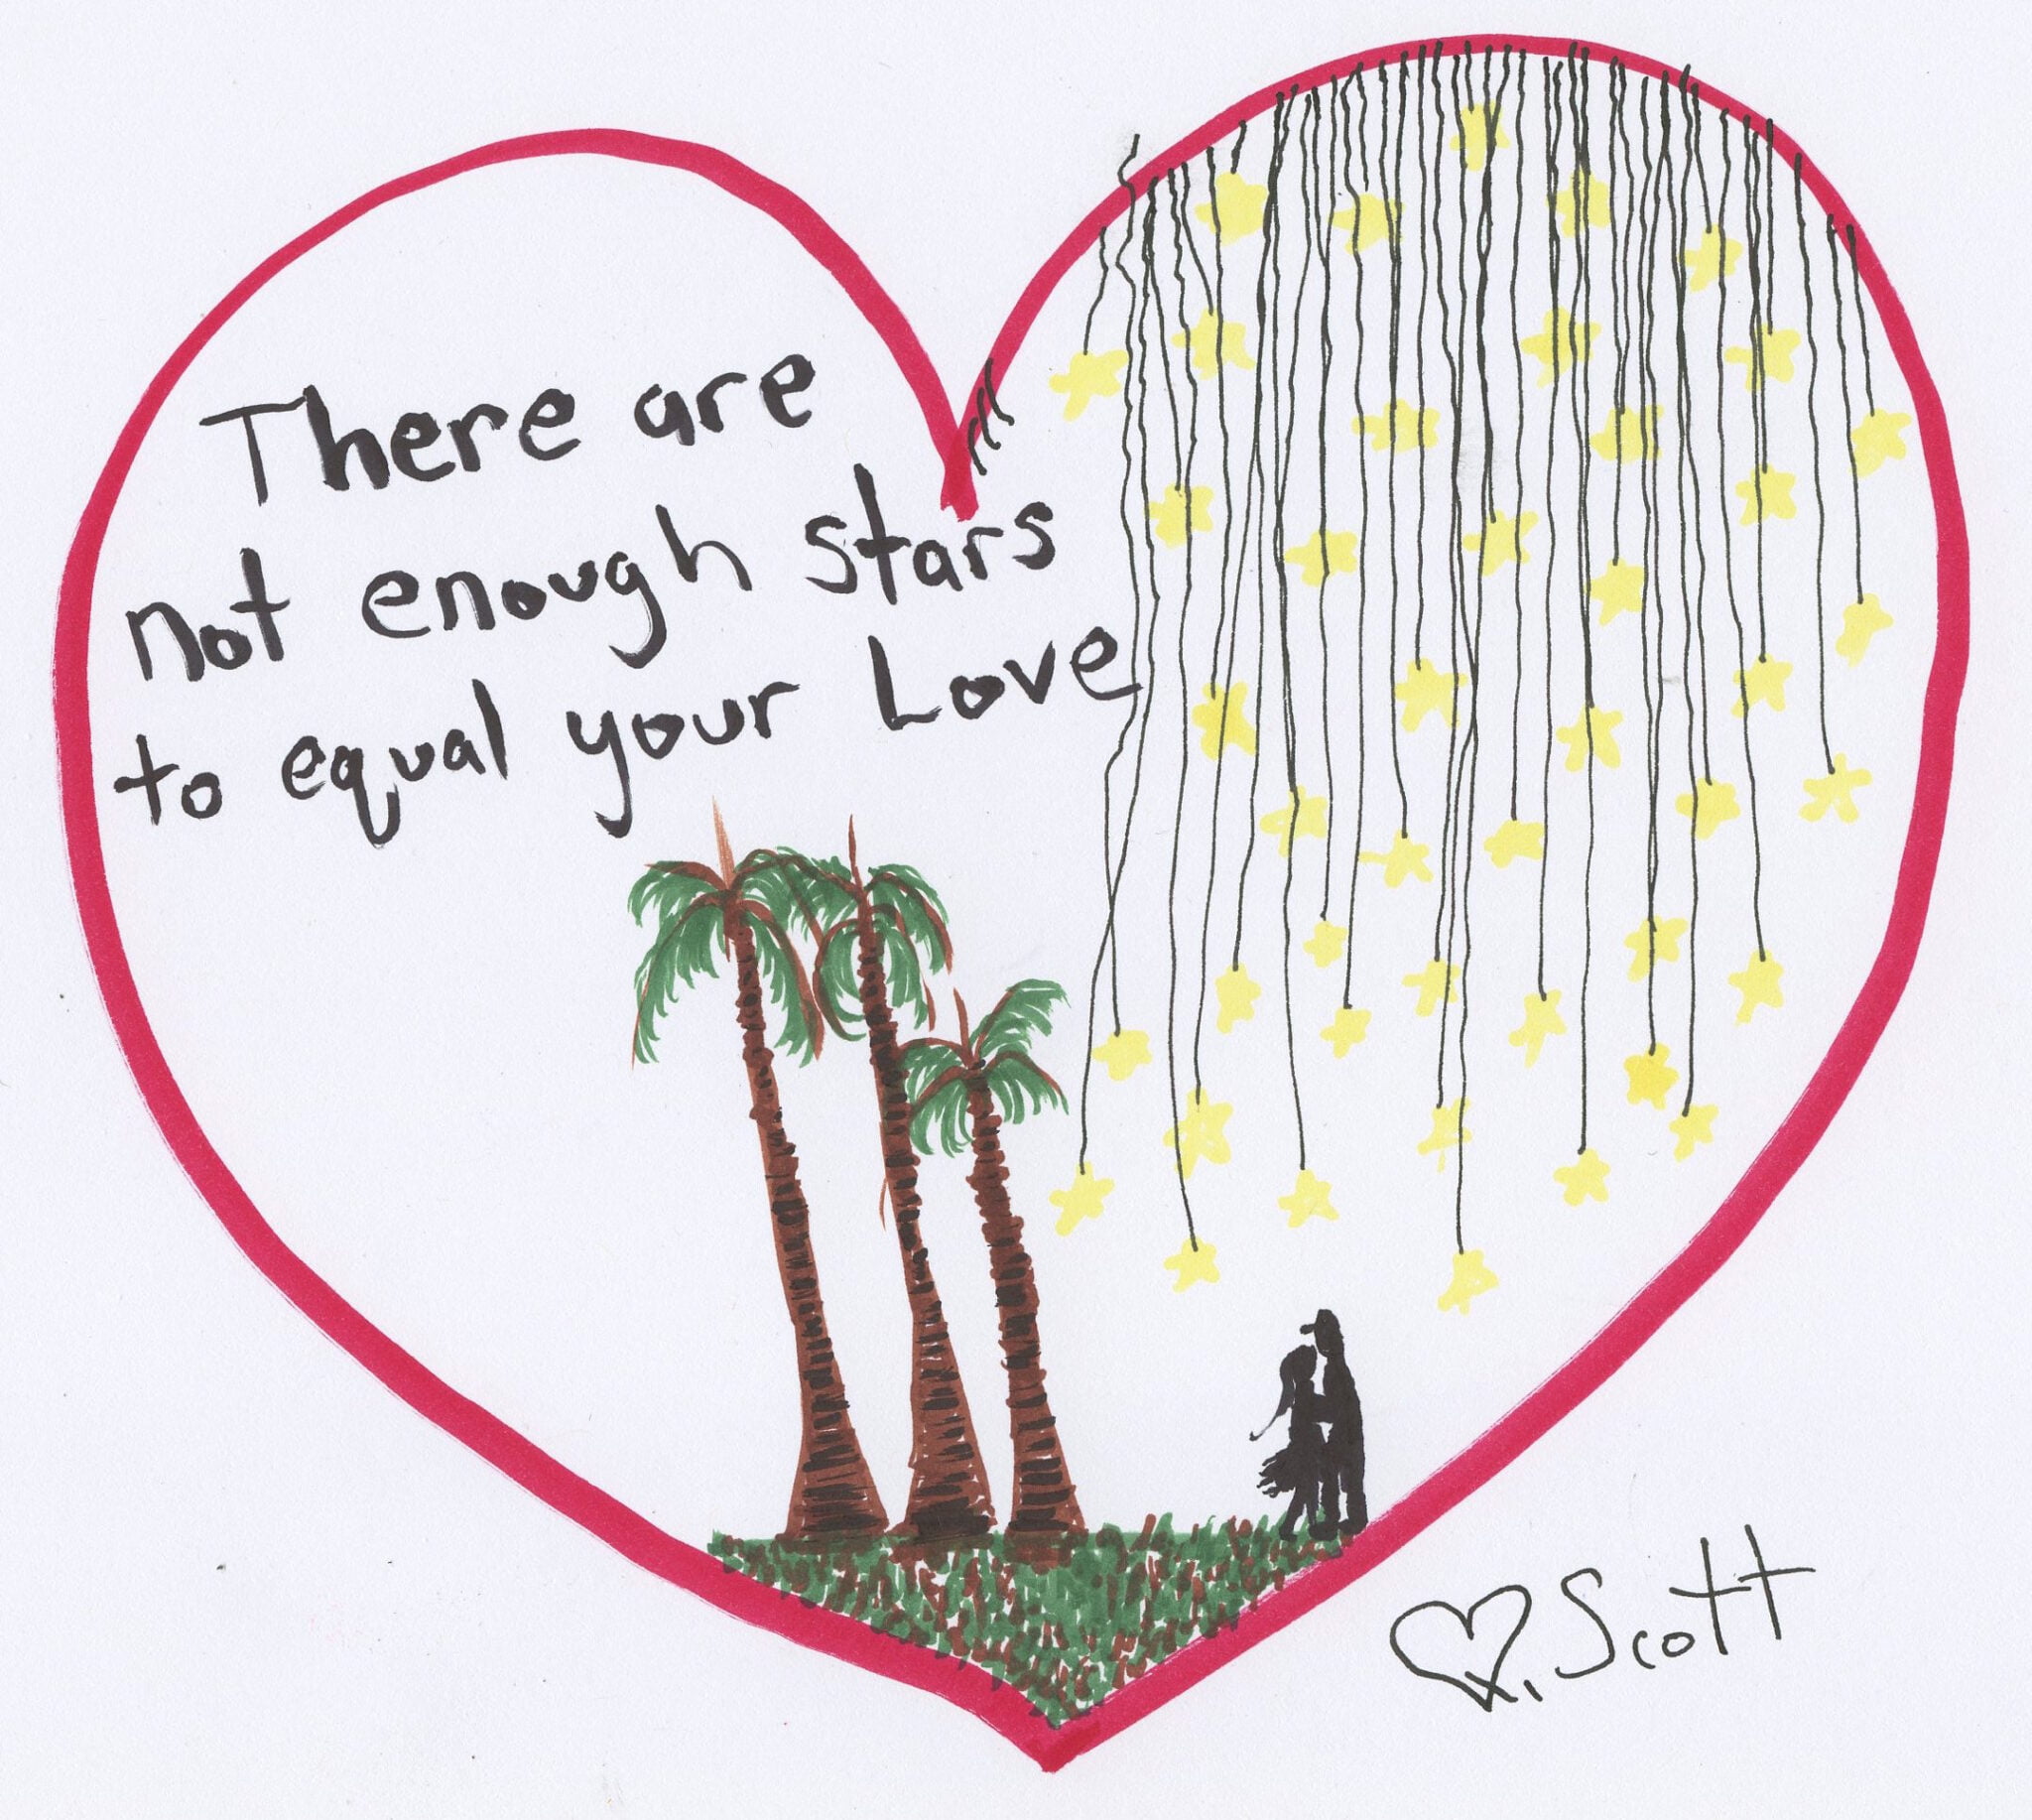 There are not enough stars to equal your love.